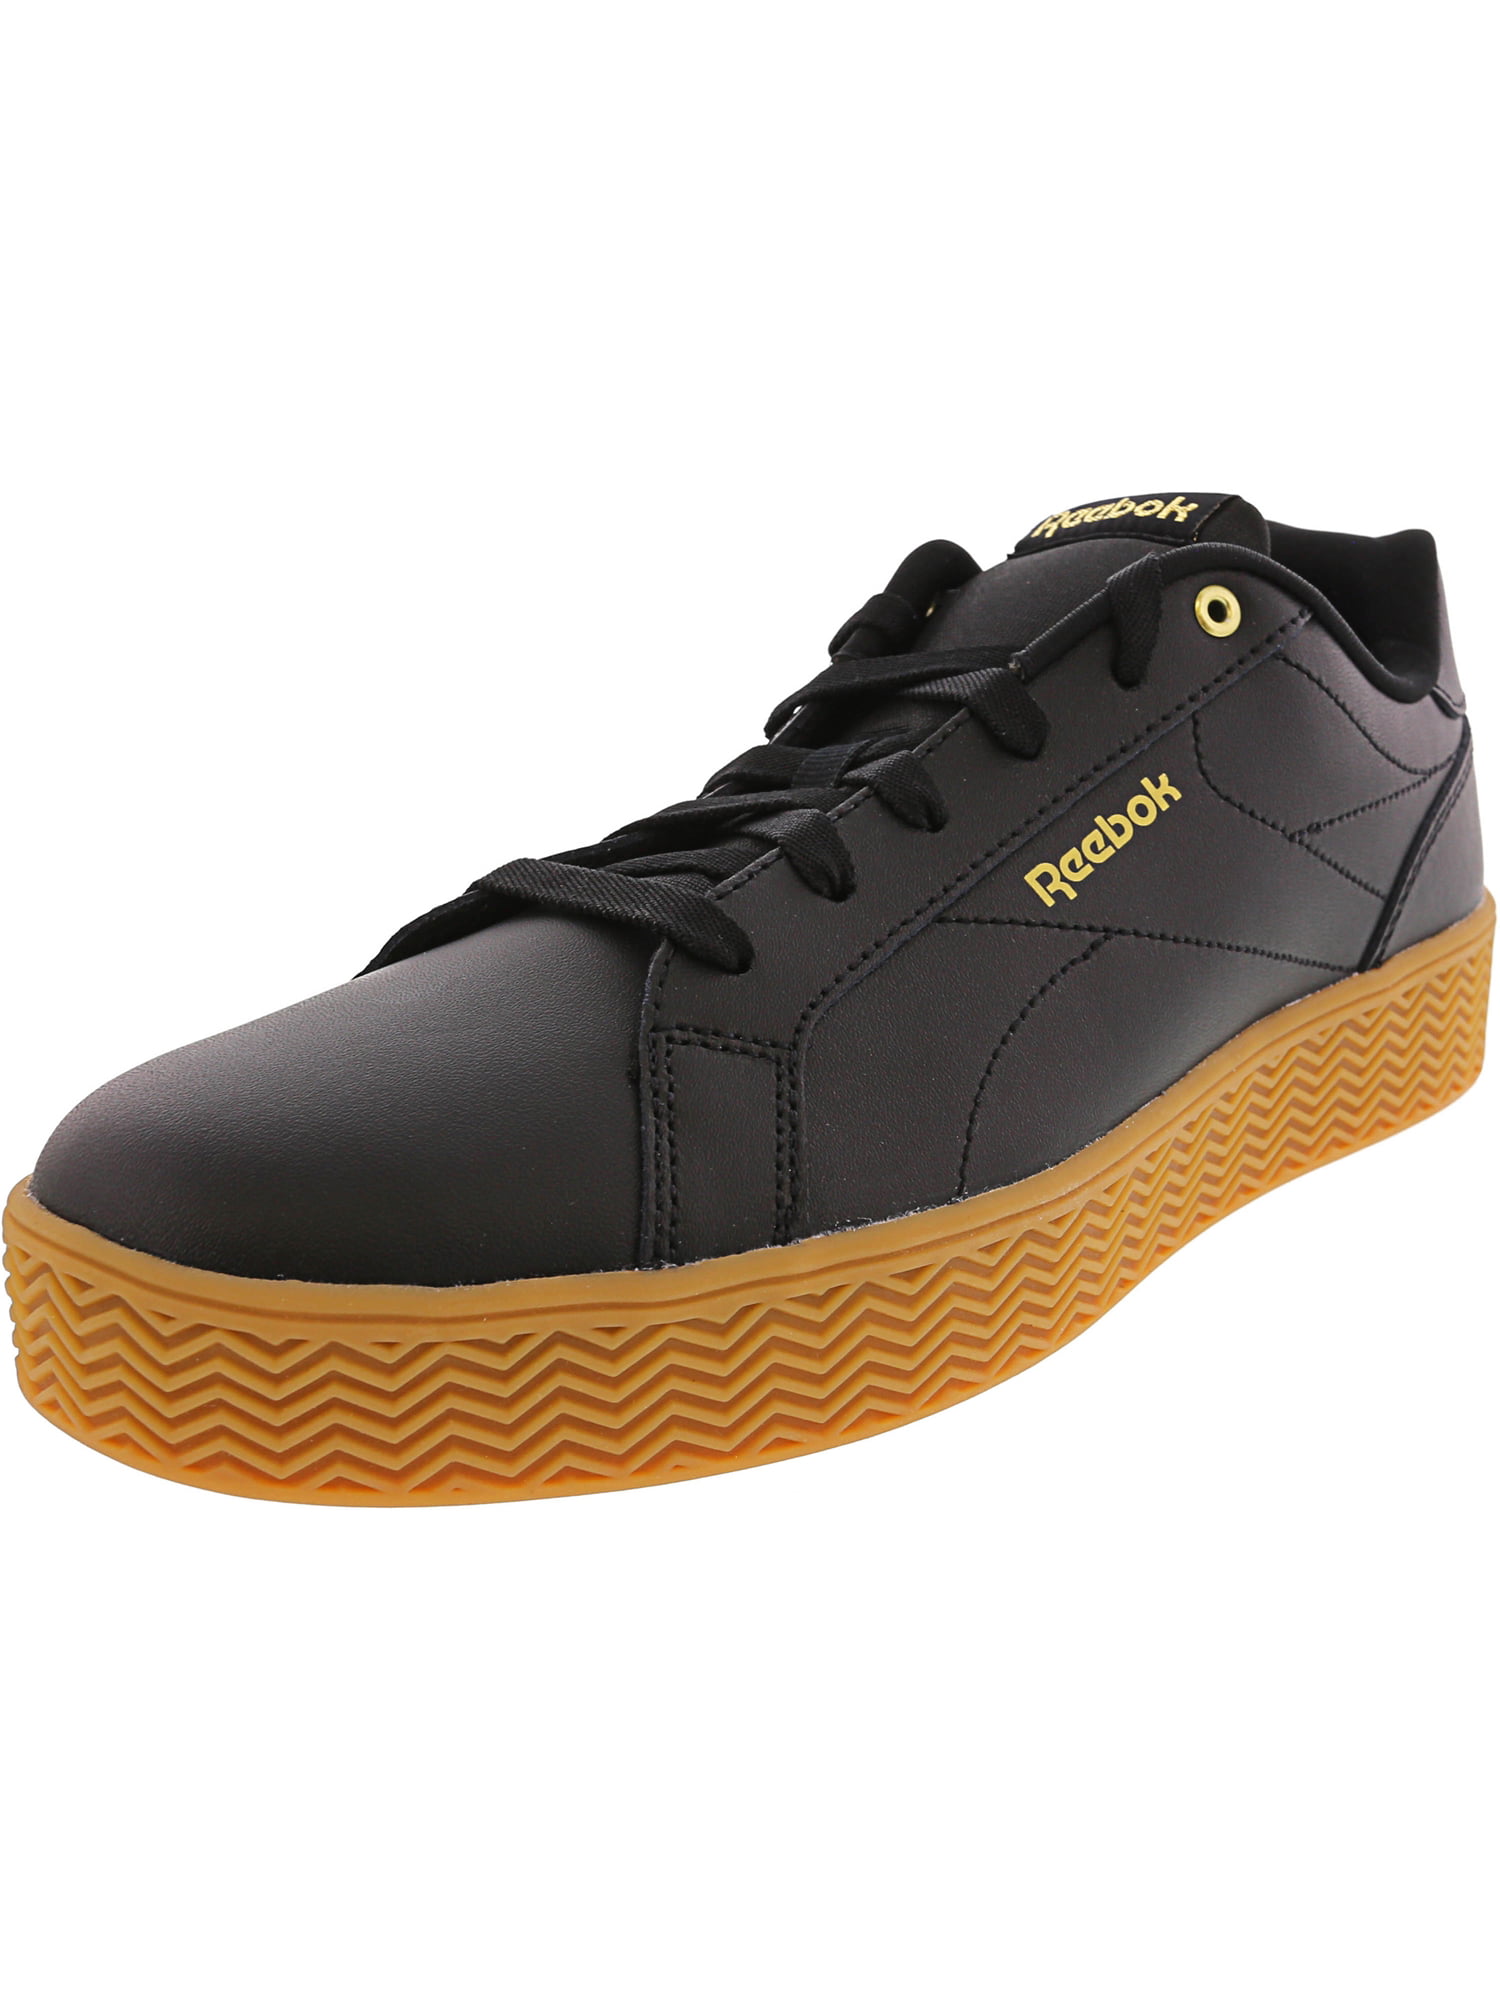 reebok black and gold shoes